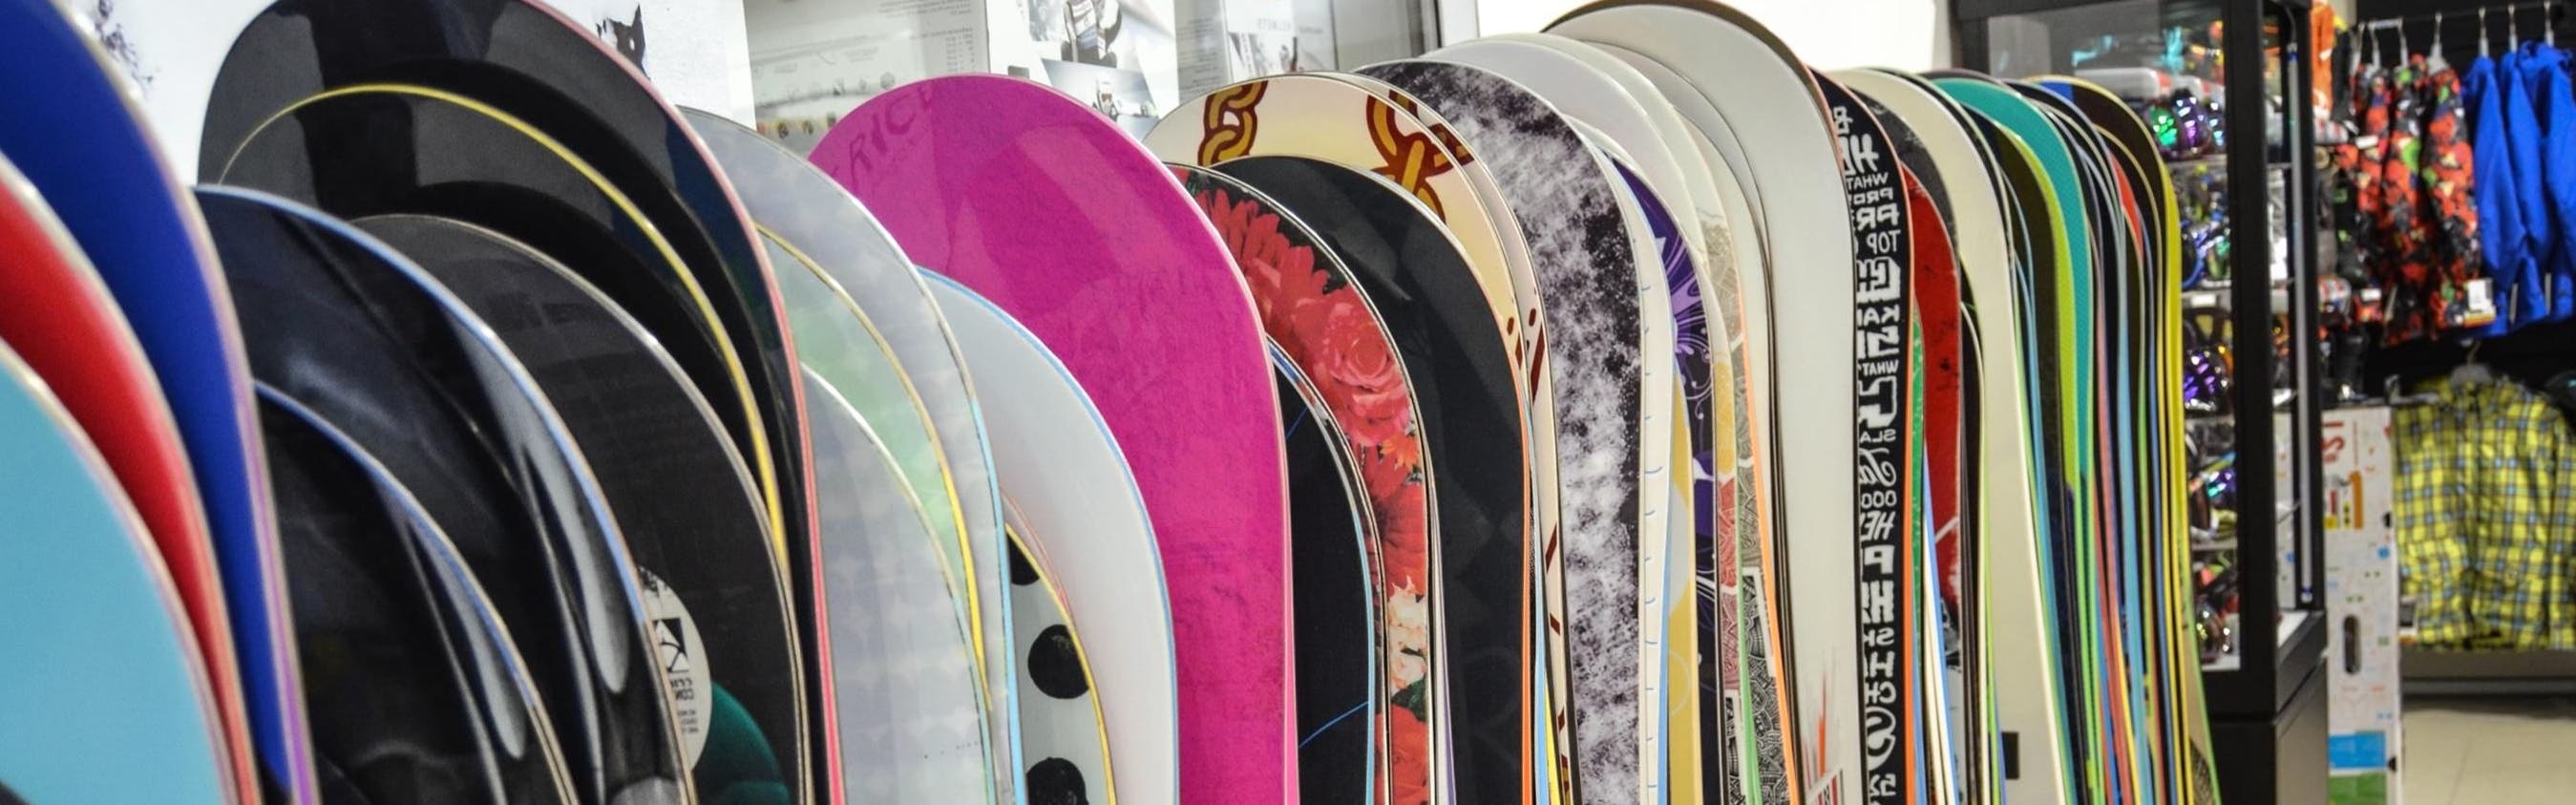 Several snowboards in a line at a store.